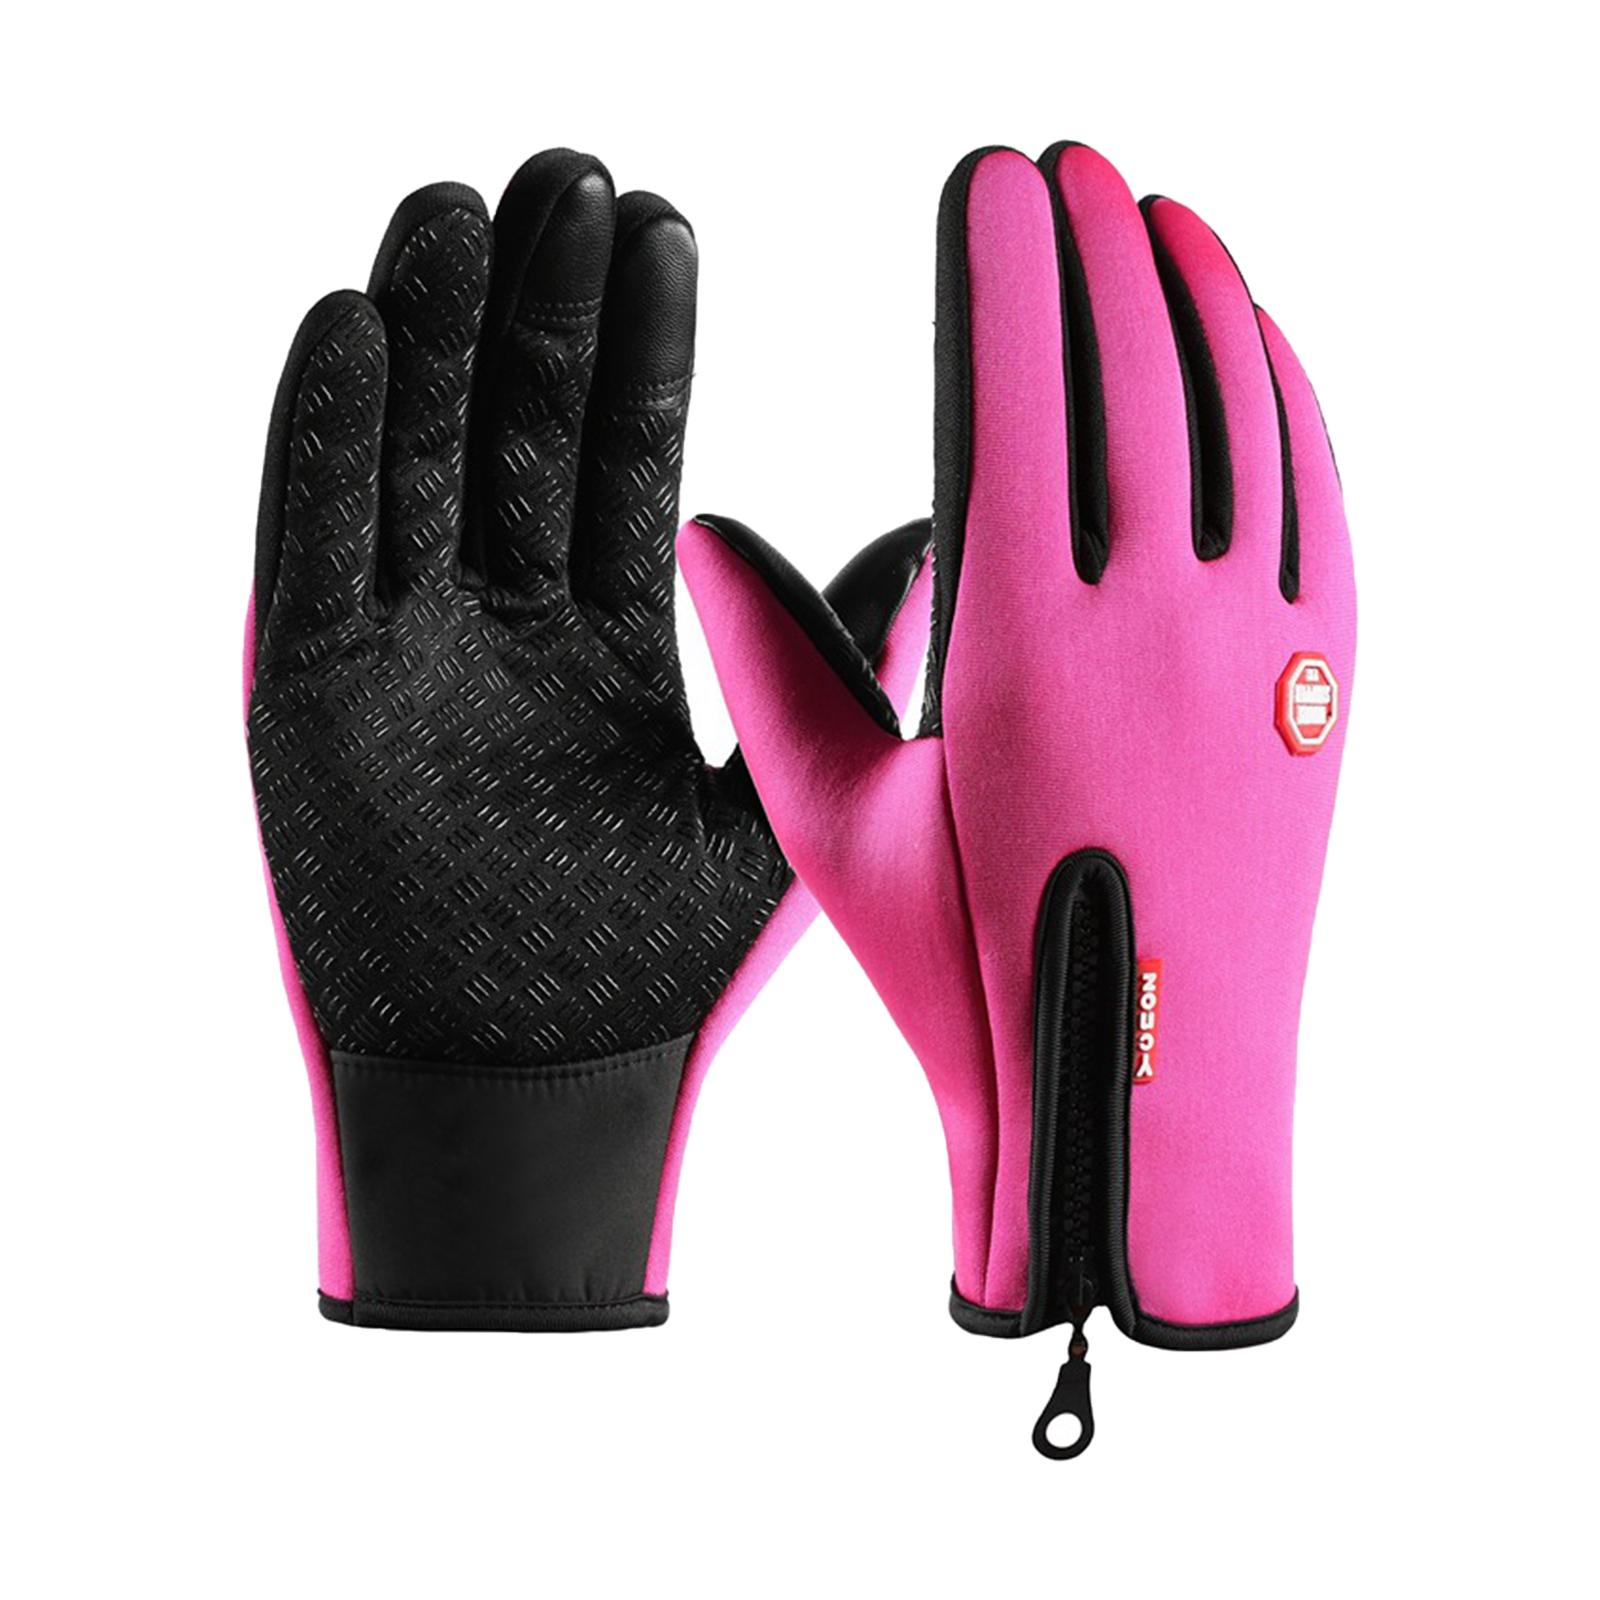 Winter Gloves Windproof Insulated for Motorcycle Cycling Adults Unisex XL Pink